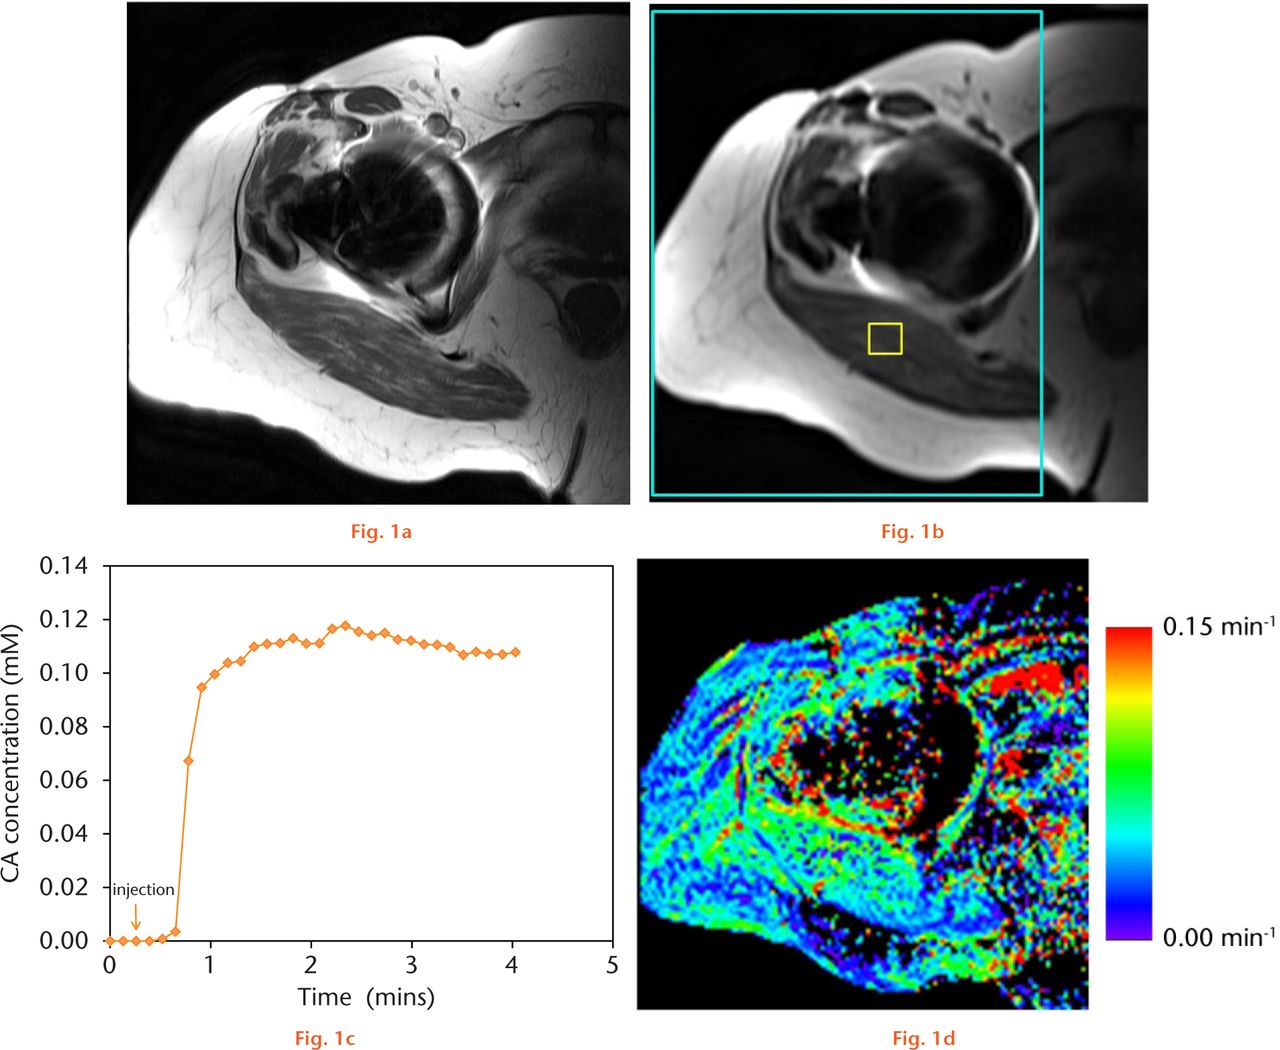  
          Example dynamic contrast enhanced (DCE)-MRI dataset for one patient. a) One slice of a high-resolution T1-weighted FSE sequence (standard-of-care anatomic imaging performed before DCE-MRI). b) Same slice location with one image of the DCE-MRI sequence. Small yellow box shows an region of interest (ROI) in muscle. Large cyan-coloured box shows the whole-tissue ROI used for mean Ktrans calculations. c) Example concentration-vs-time curve in the muscle ROI. d) Resultant Ktrans map, in units of min−1. The mean Ktrans value (counting non-zero values only), standard deviation, and standard error for this patient were 0.062, 0.049, and 0.00015, respectively.
        